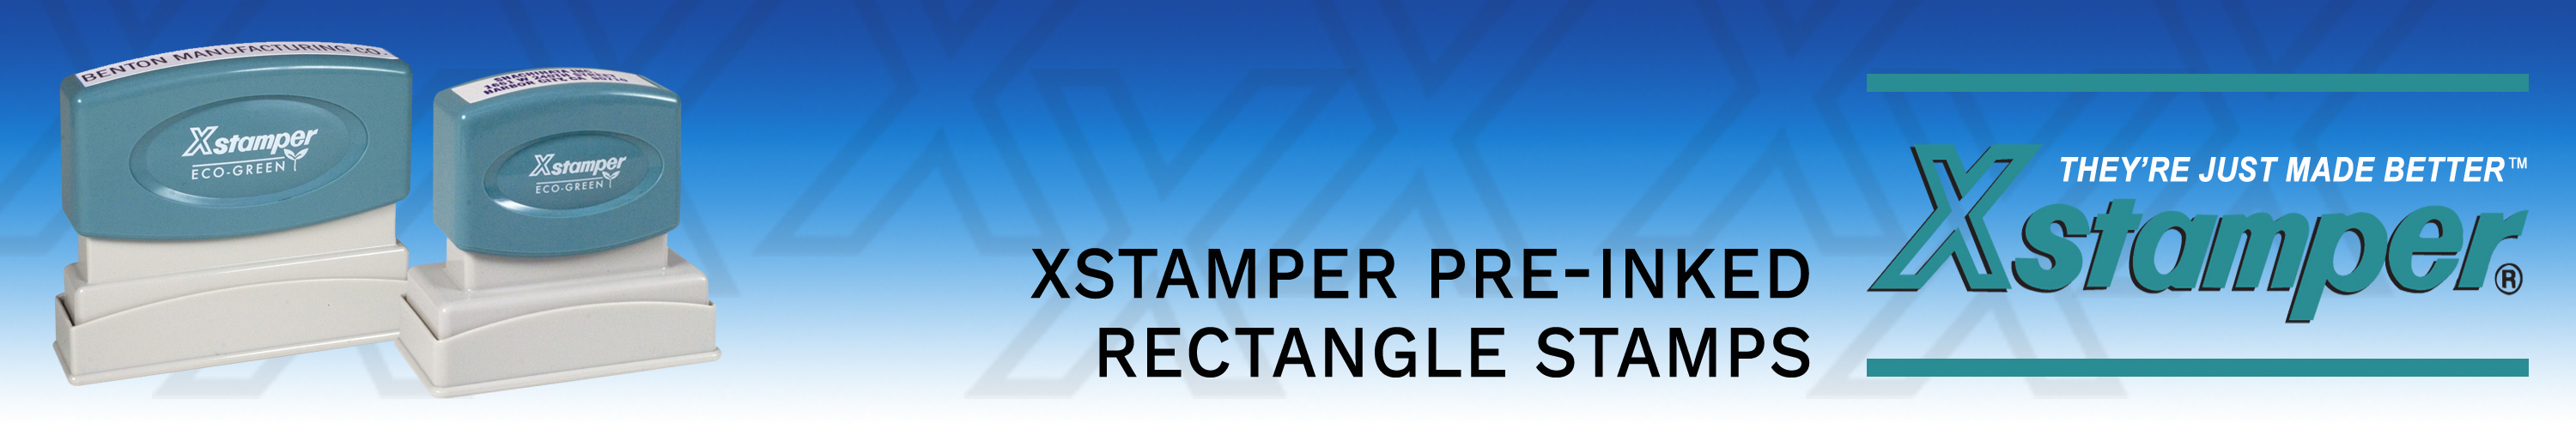 Xstamper Rectangle Stamps customized for you. Made and shipped daily.  No sales tax ever. 